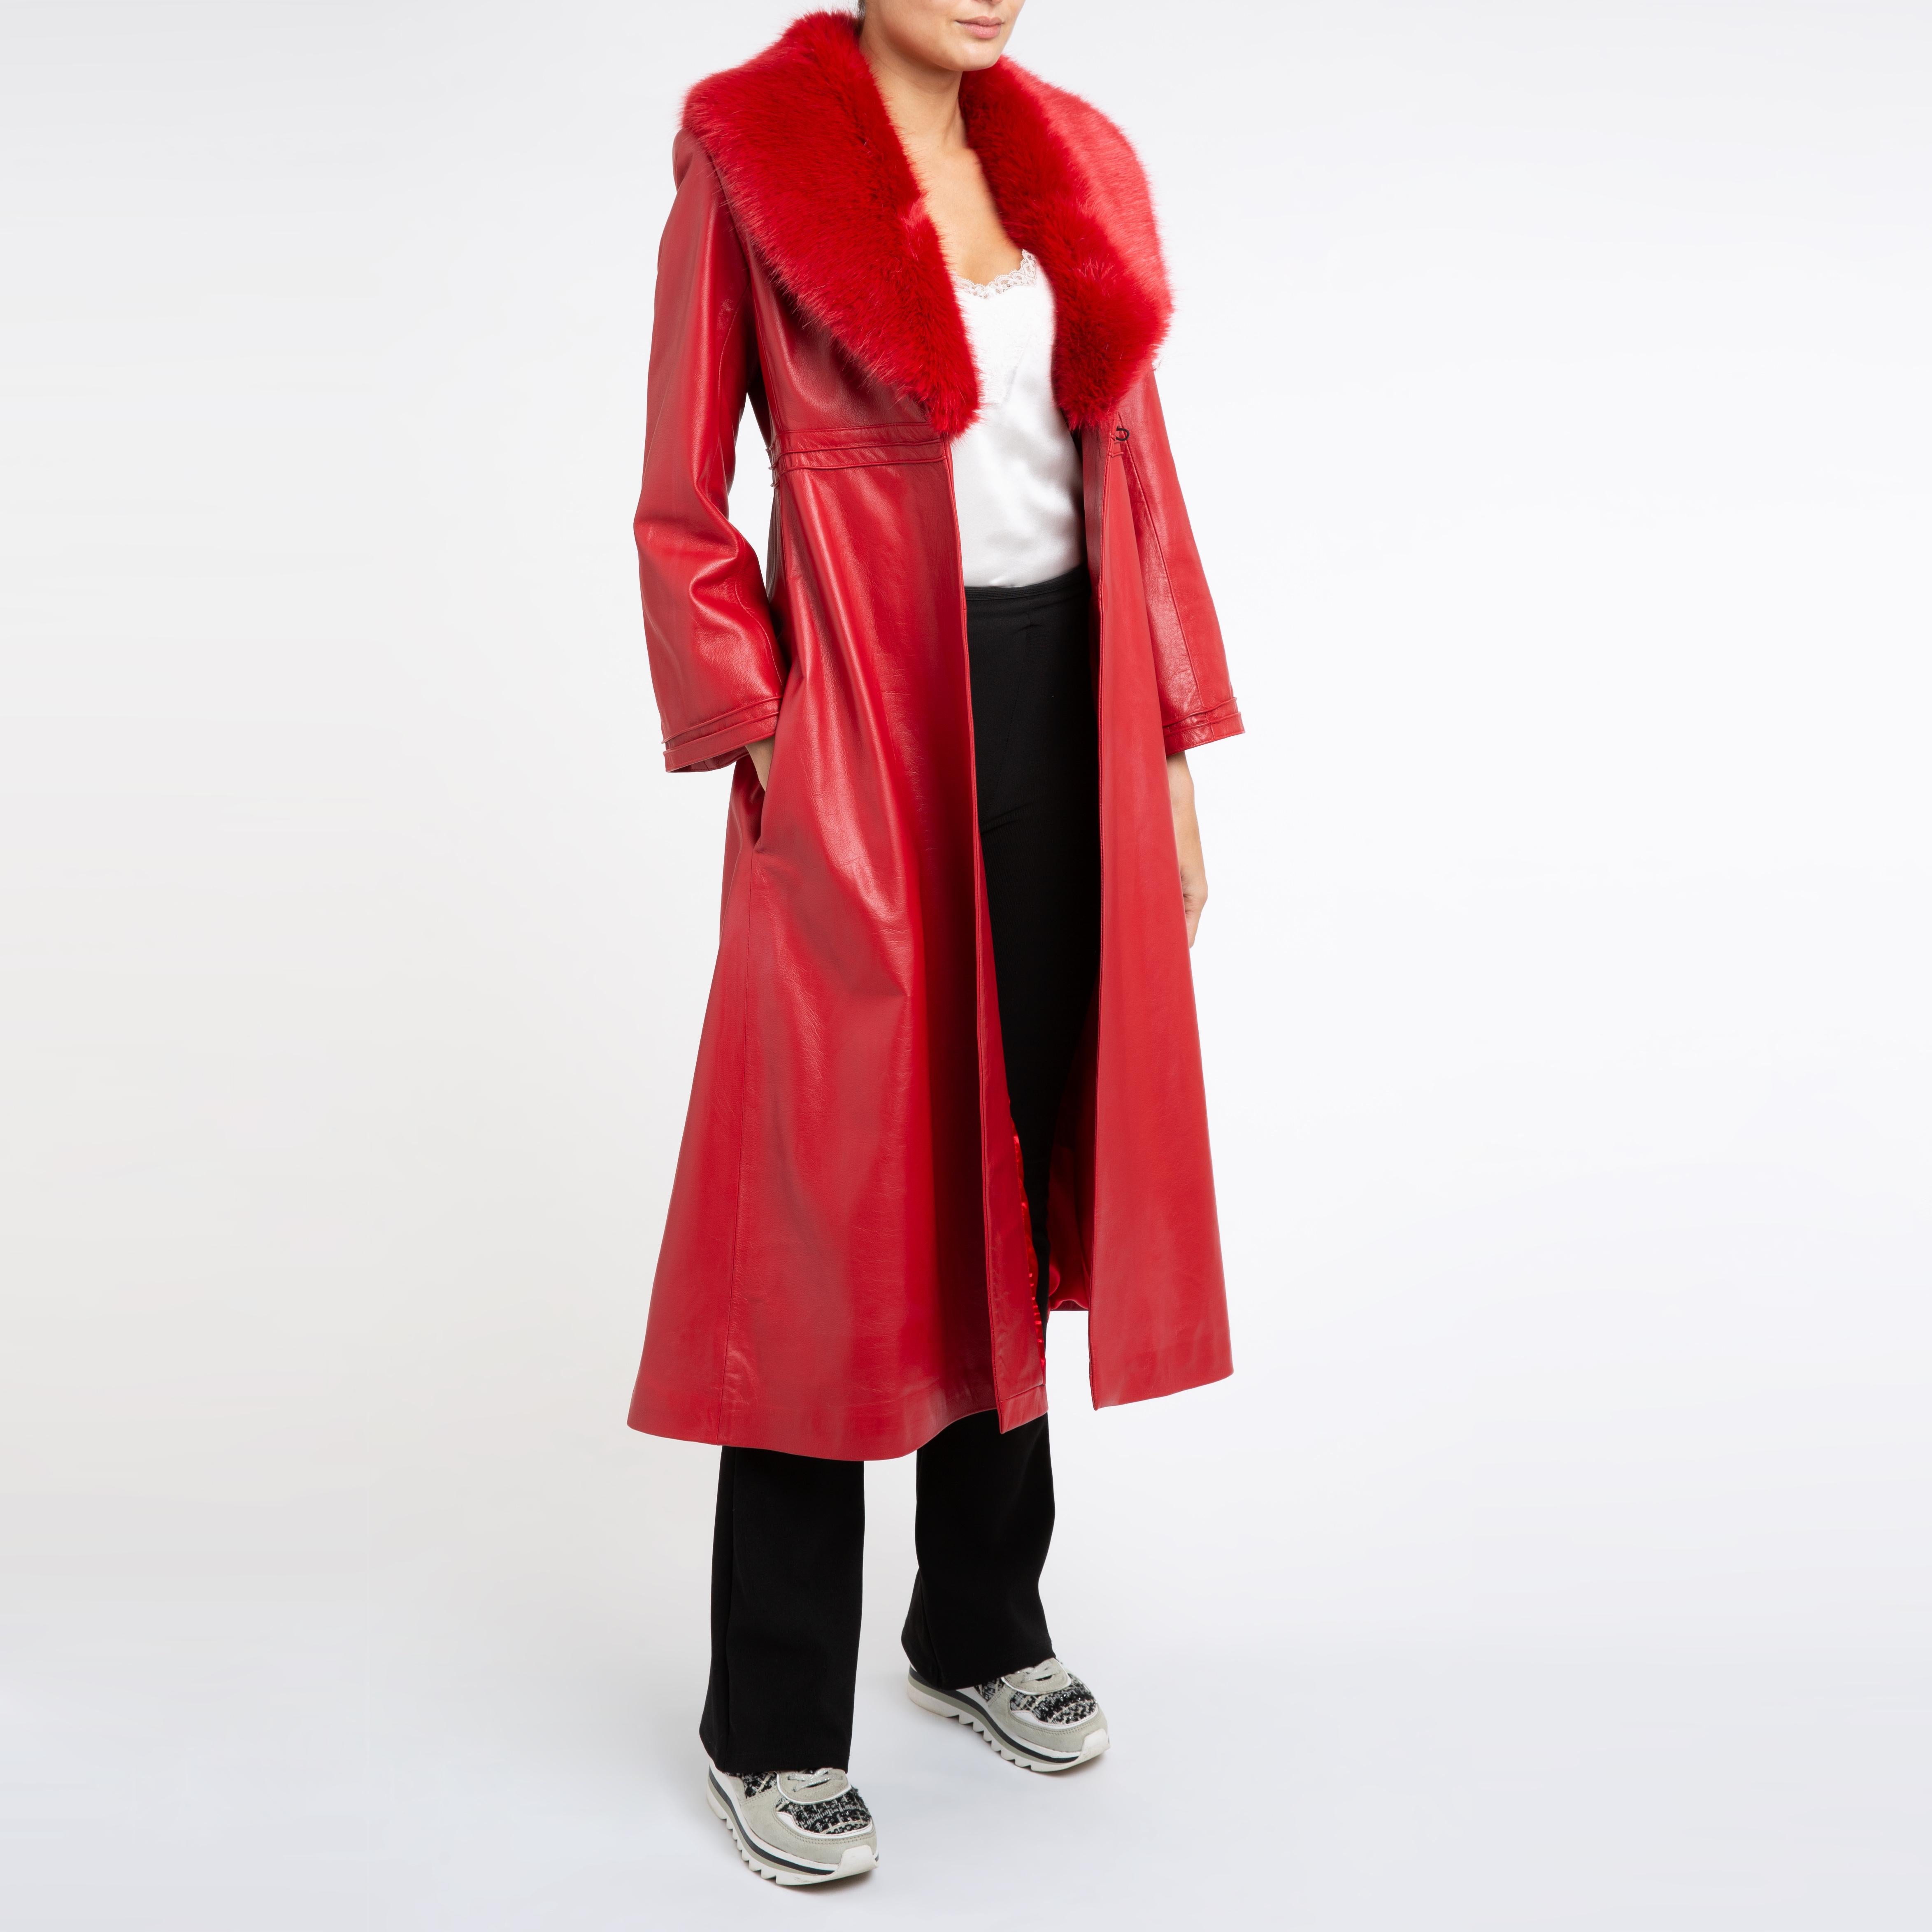 Verheyen London Edward Leather Coat with Faux Fur Collar in Red - Size uk 16

The Edward Leather Coat created by Verheyen London is a romantic design inspired by the 1970s and Edwardian Era of Fashion.  A timeless design to be be worn for a lifetime